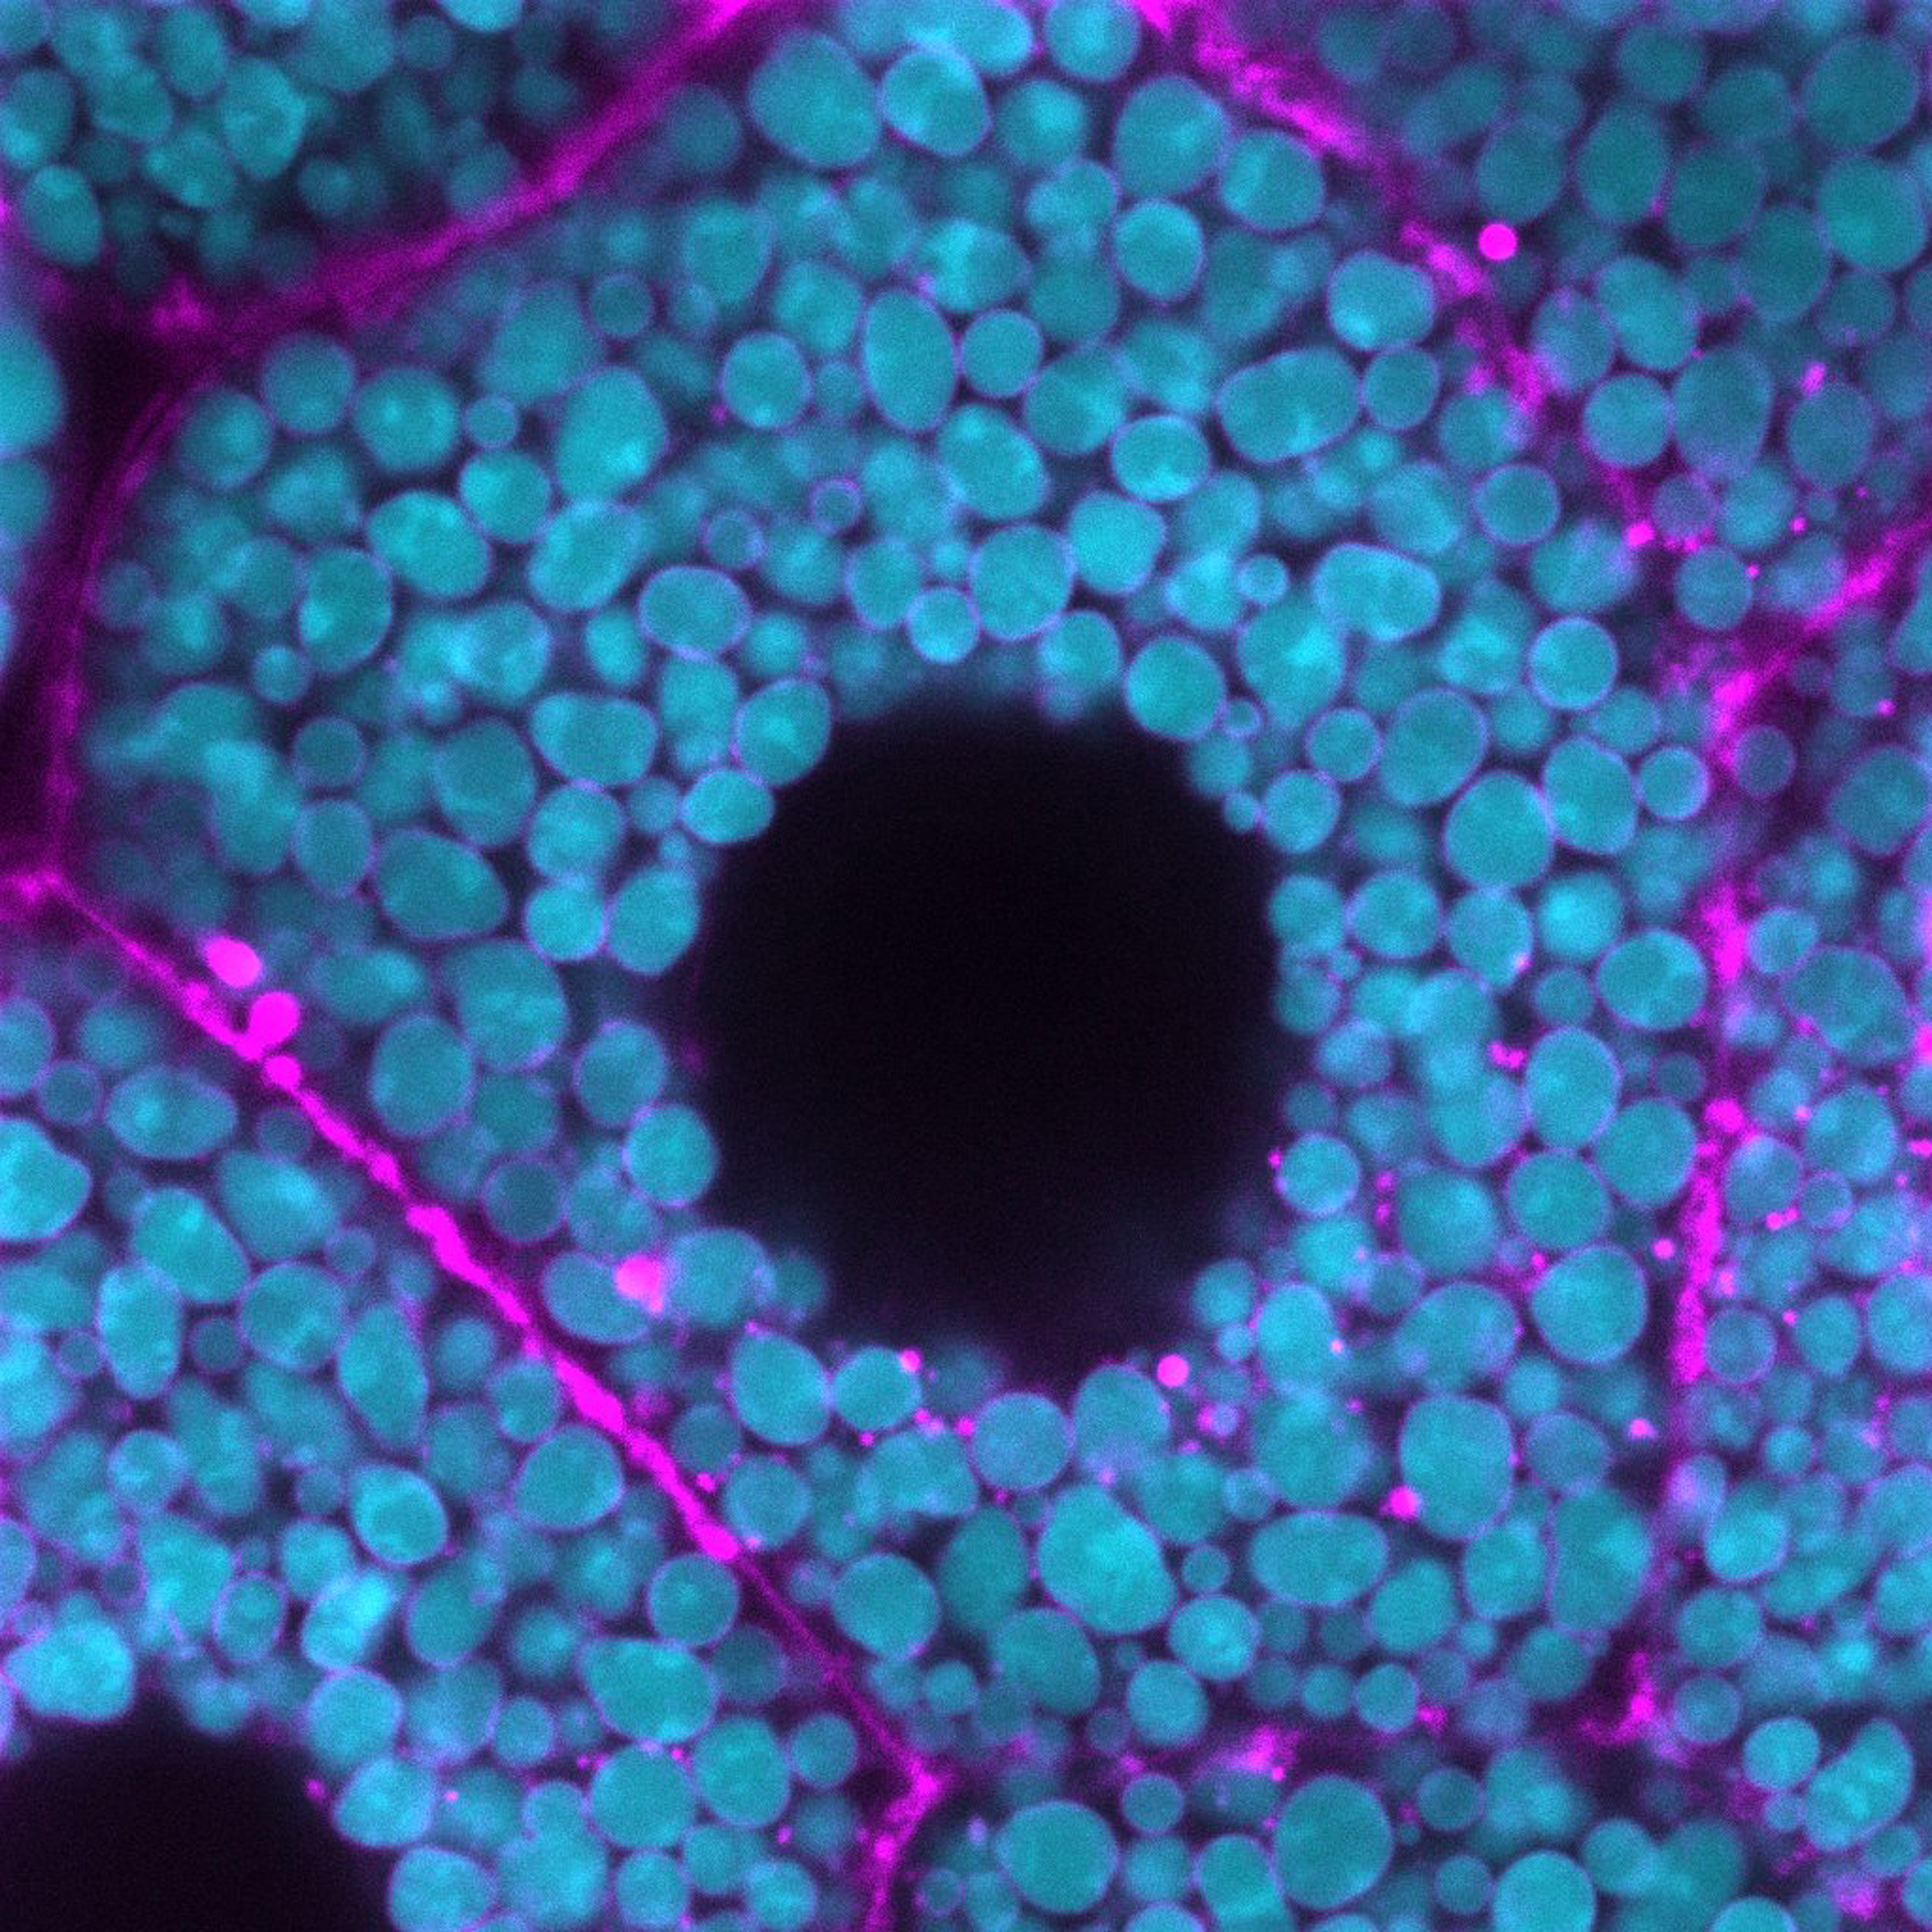 Mucin-containing secretory granules (turquoise) fusing with the apical membrane (pink).